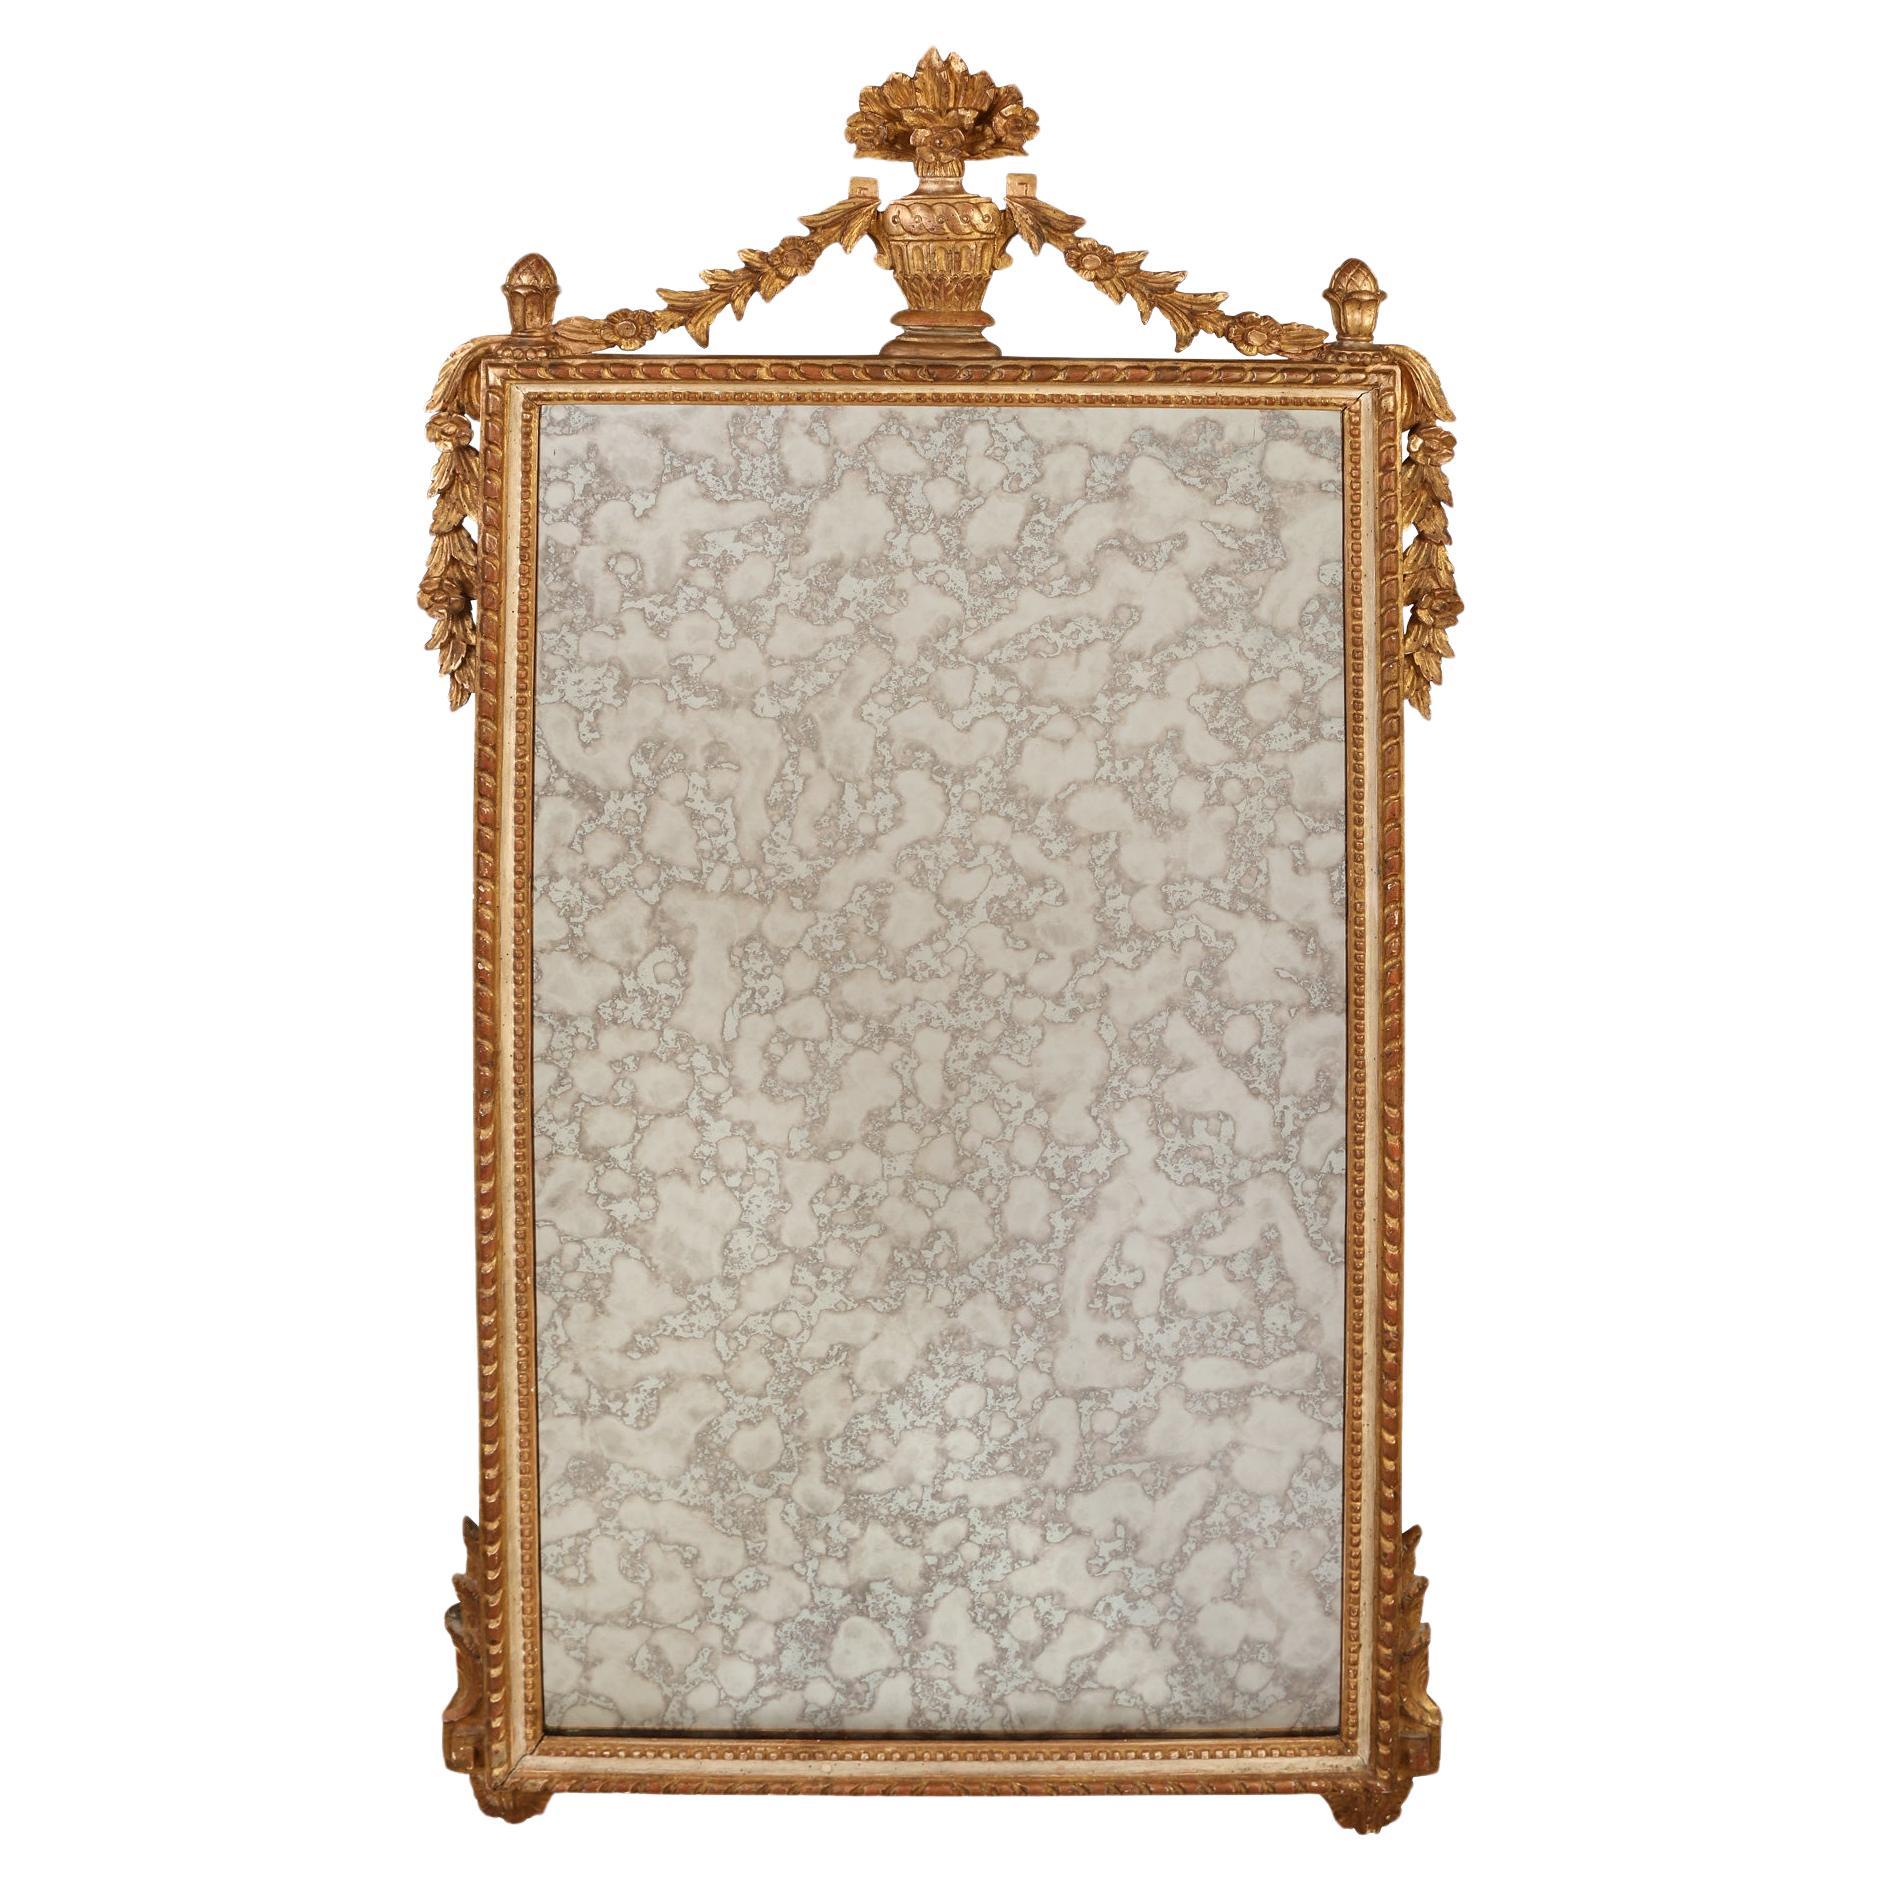 Neoclassical Giltwood Mirror With Urn and Garland Crest For Sale